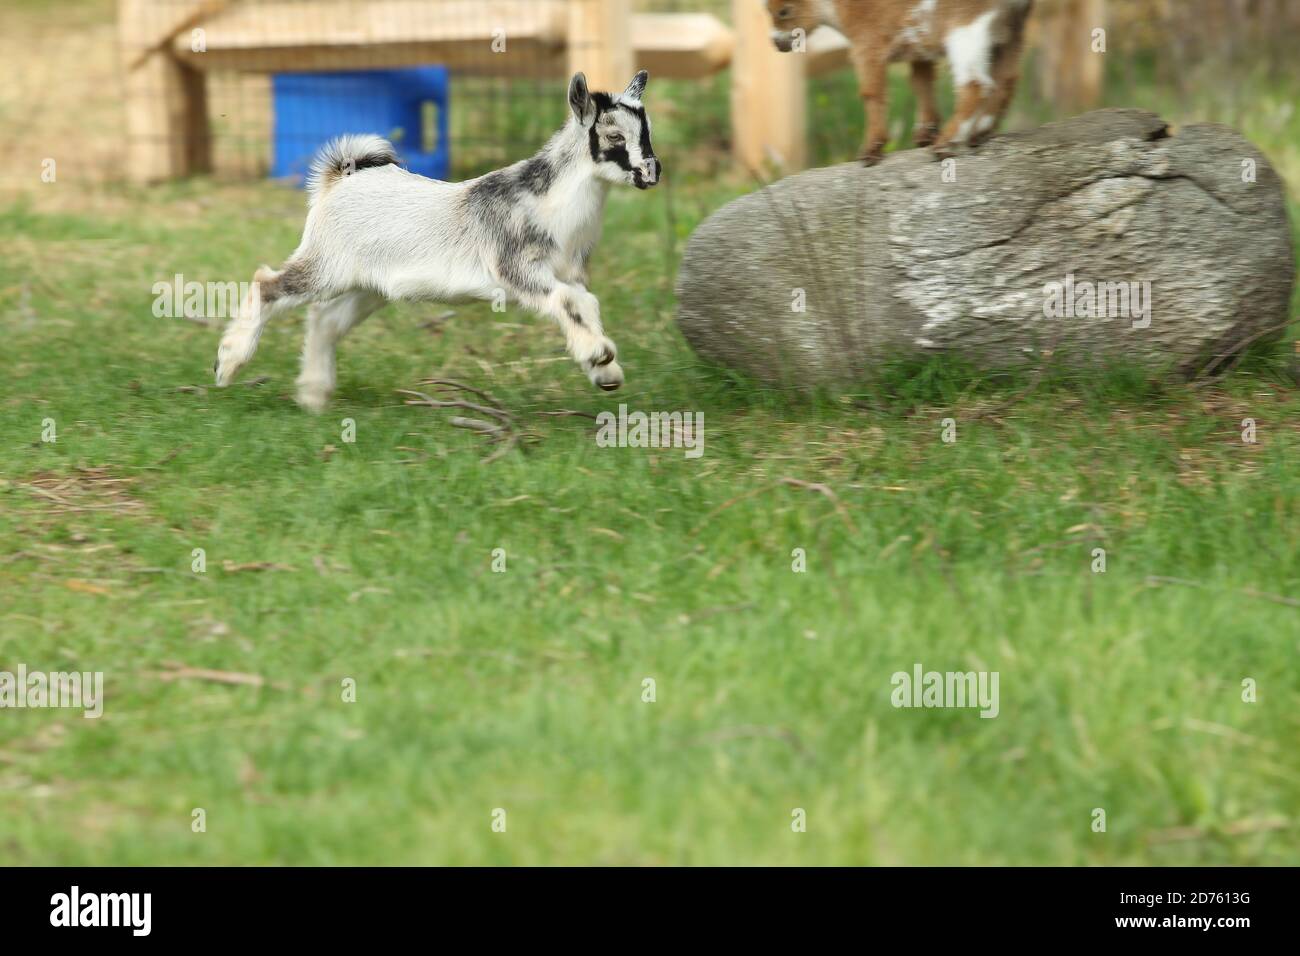 Lovely striped baby goat running on grass at farm Stock Photo